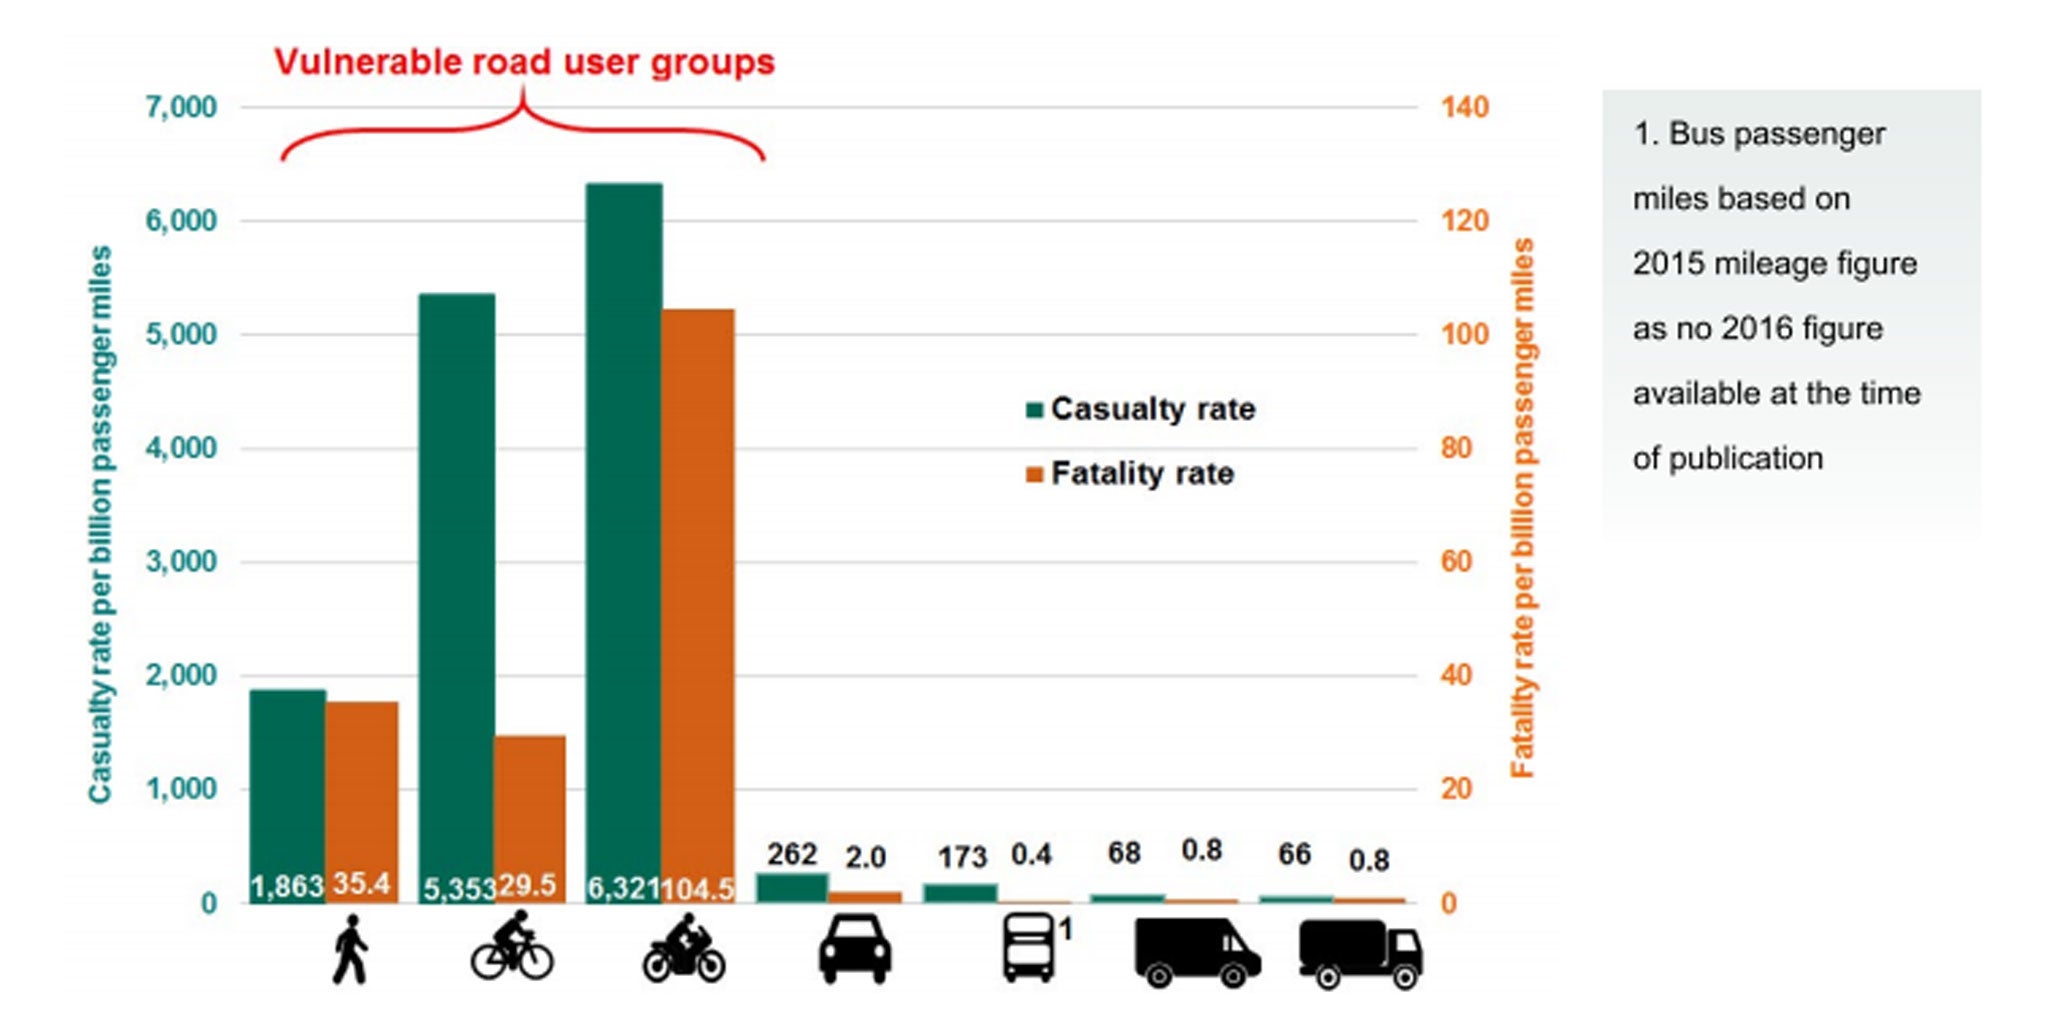 Casualty and fatality rates per billion passenger miles by road user type in Great Britain for 2016